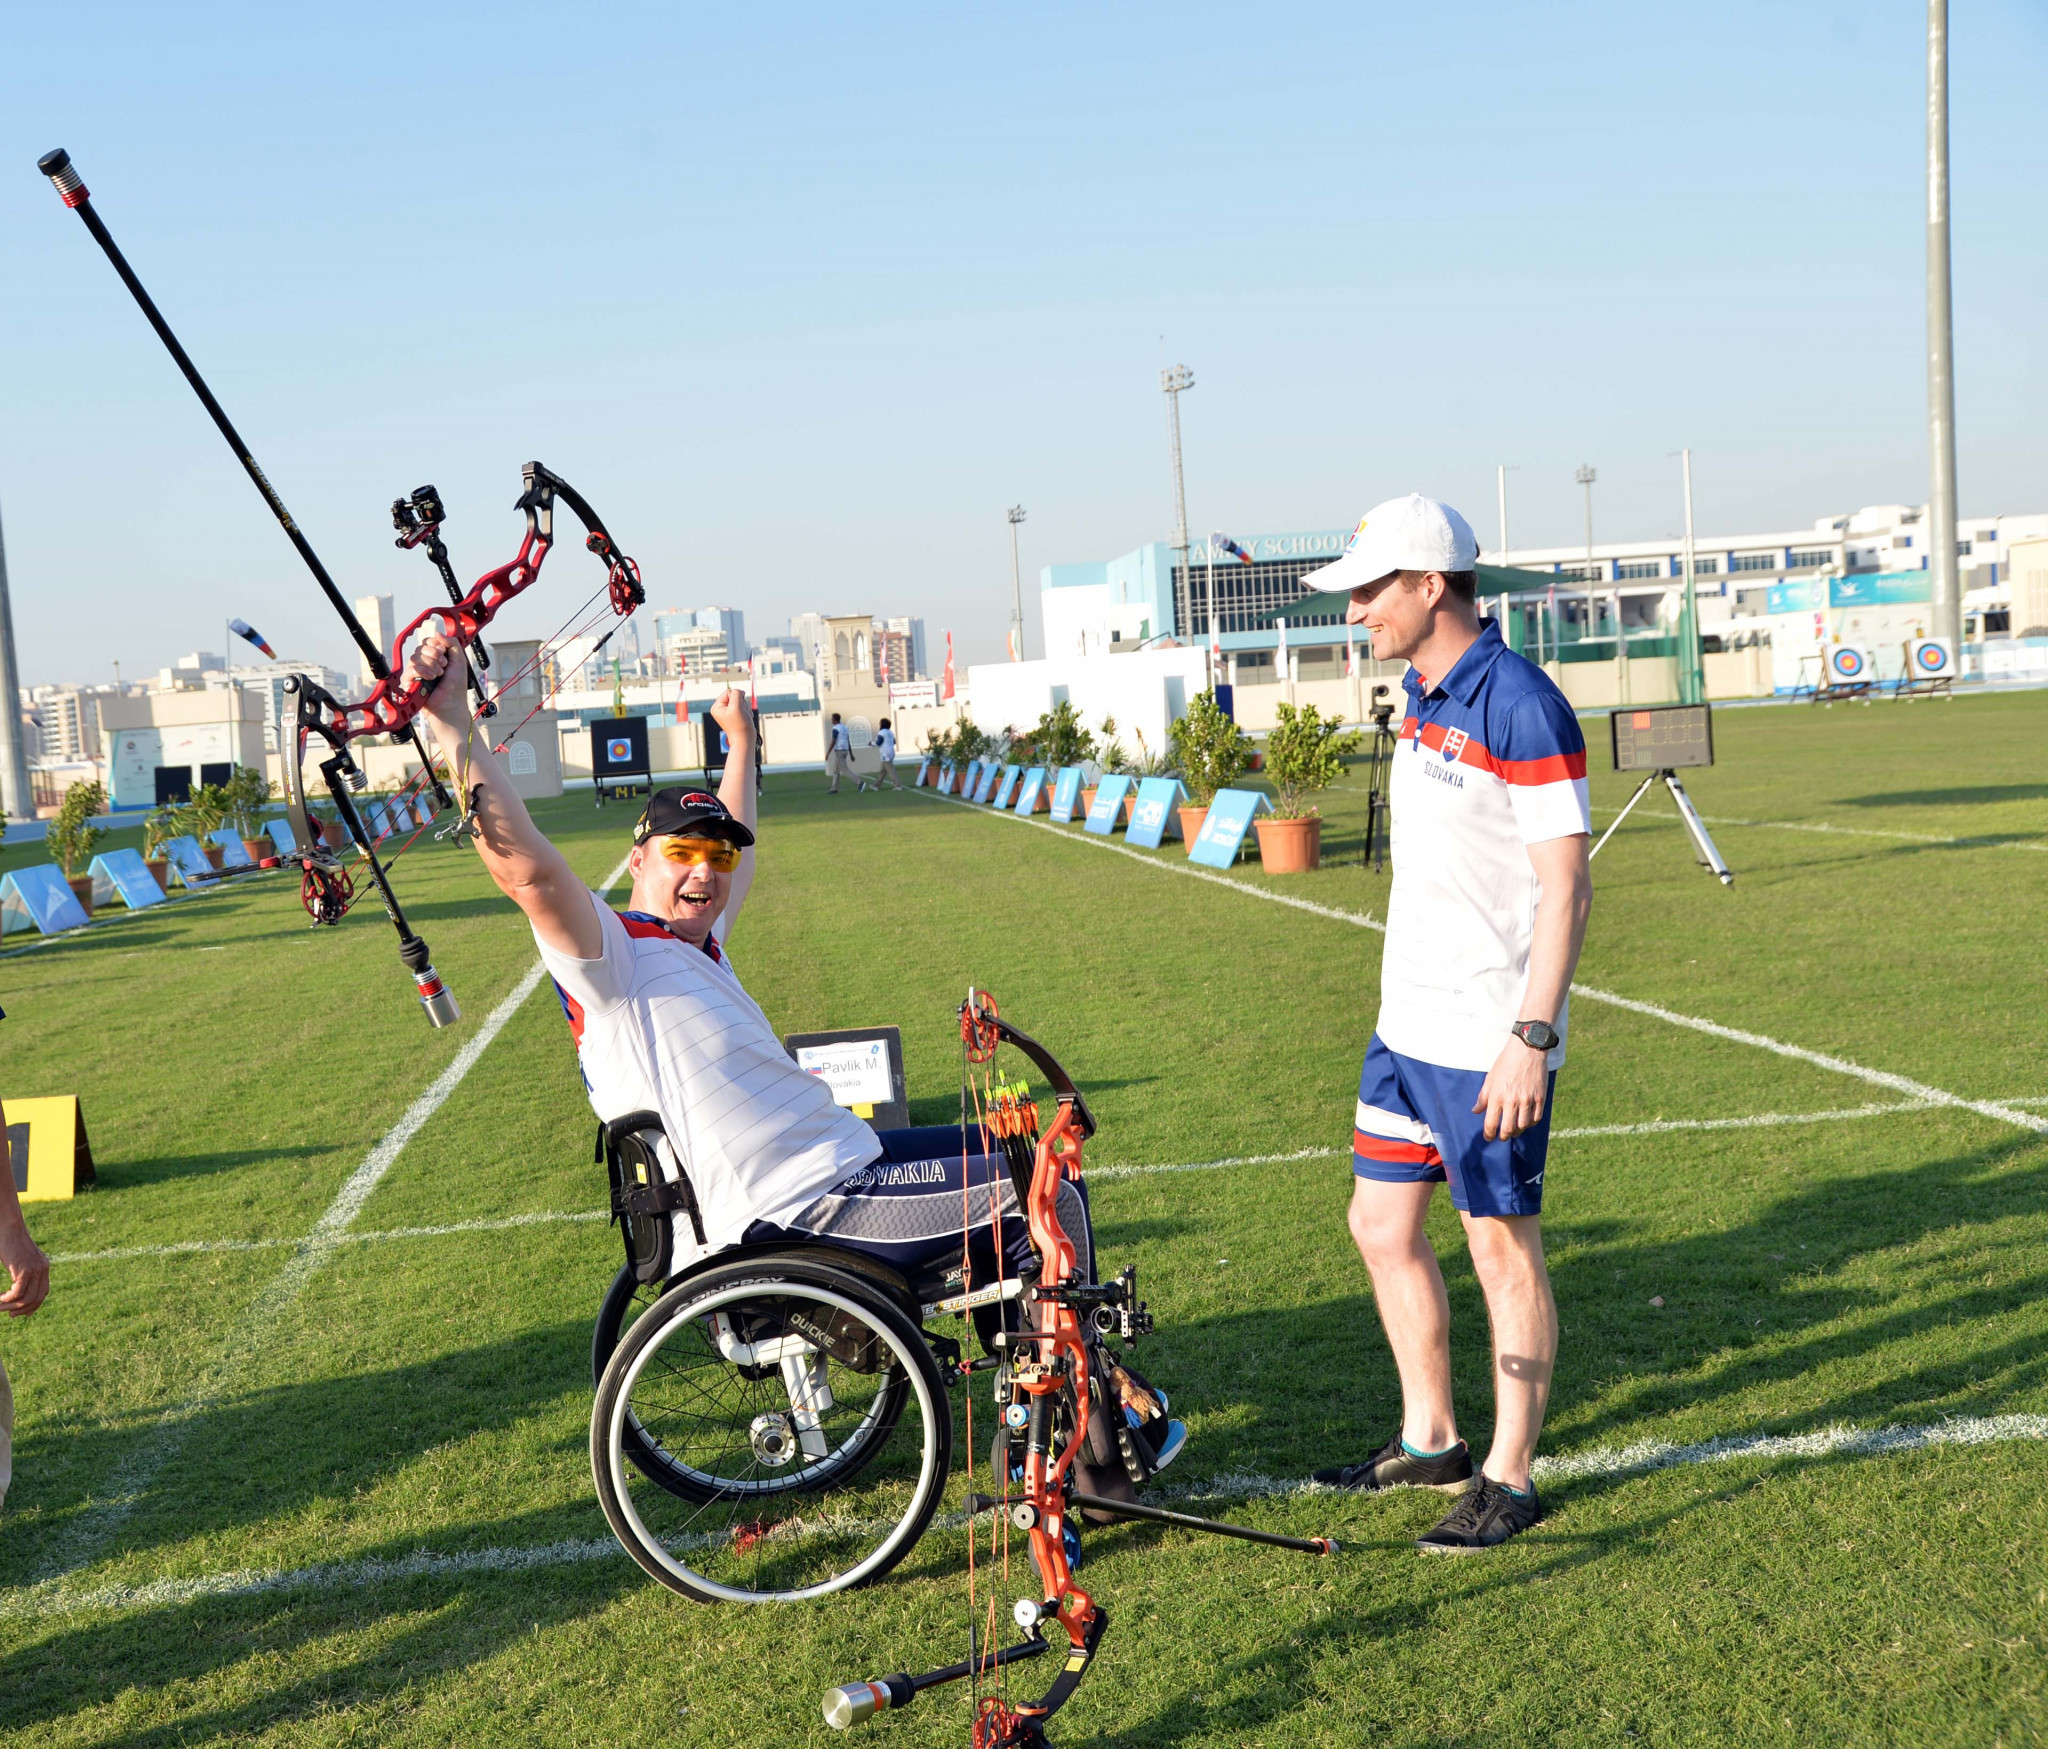 Slovakia's Marcel Pavlik earned gold in the compound men's open at the Fazza Para-archery world rankings tournament ©Asian Paralympic Committee